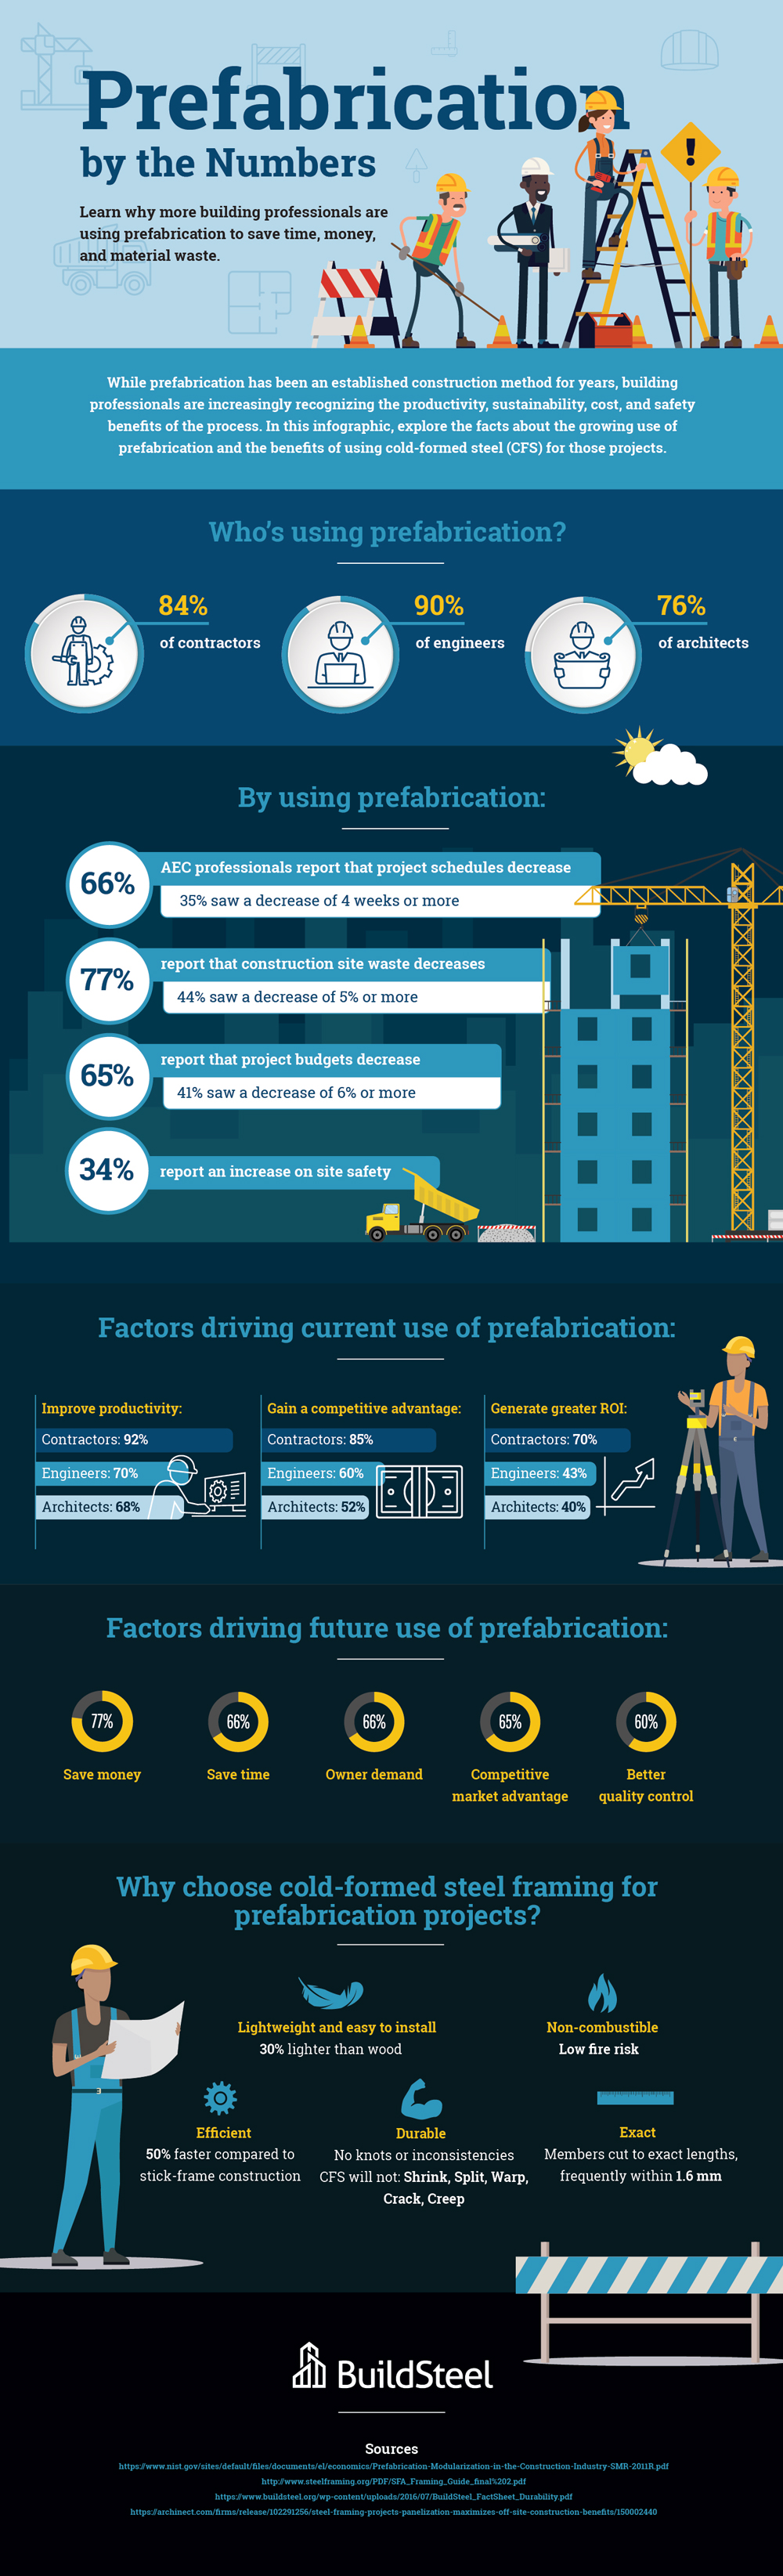 Infographic: Prefabrication by the Numbers